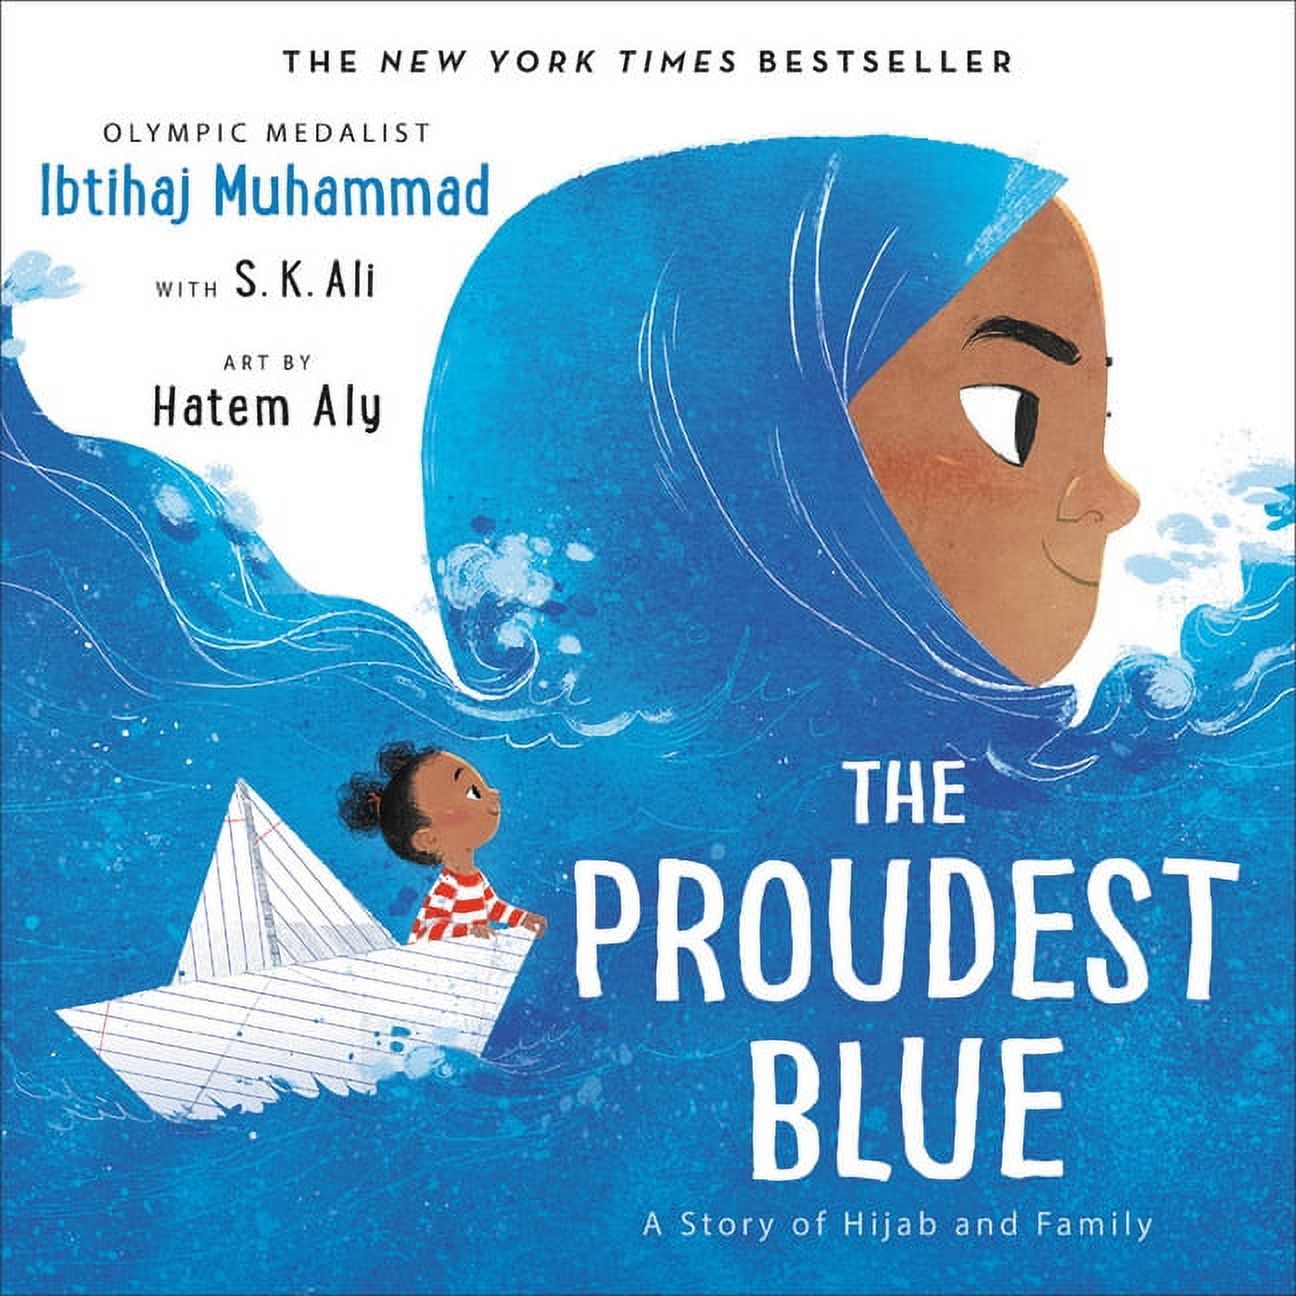 The Proudest Blue : A Story of Hijab and Family (Hardcover) - image 1 of 1